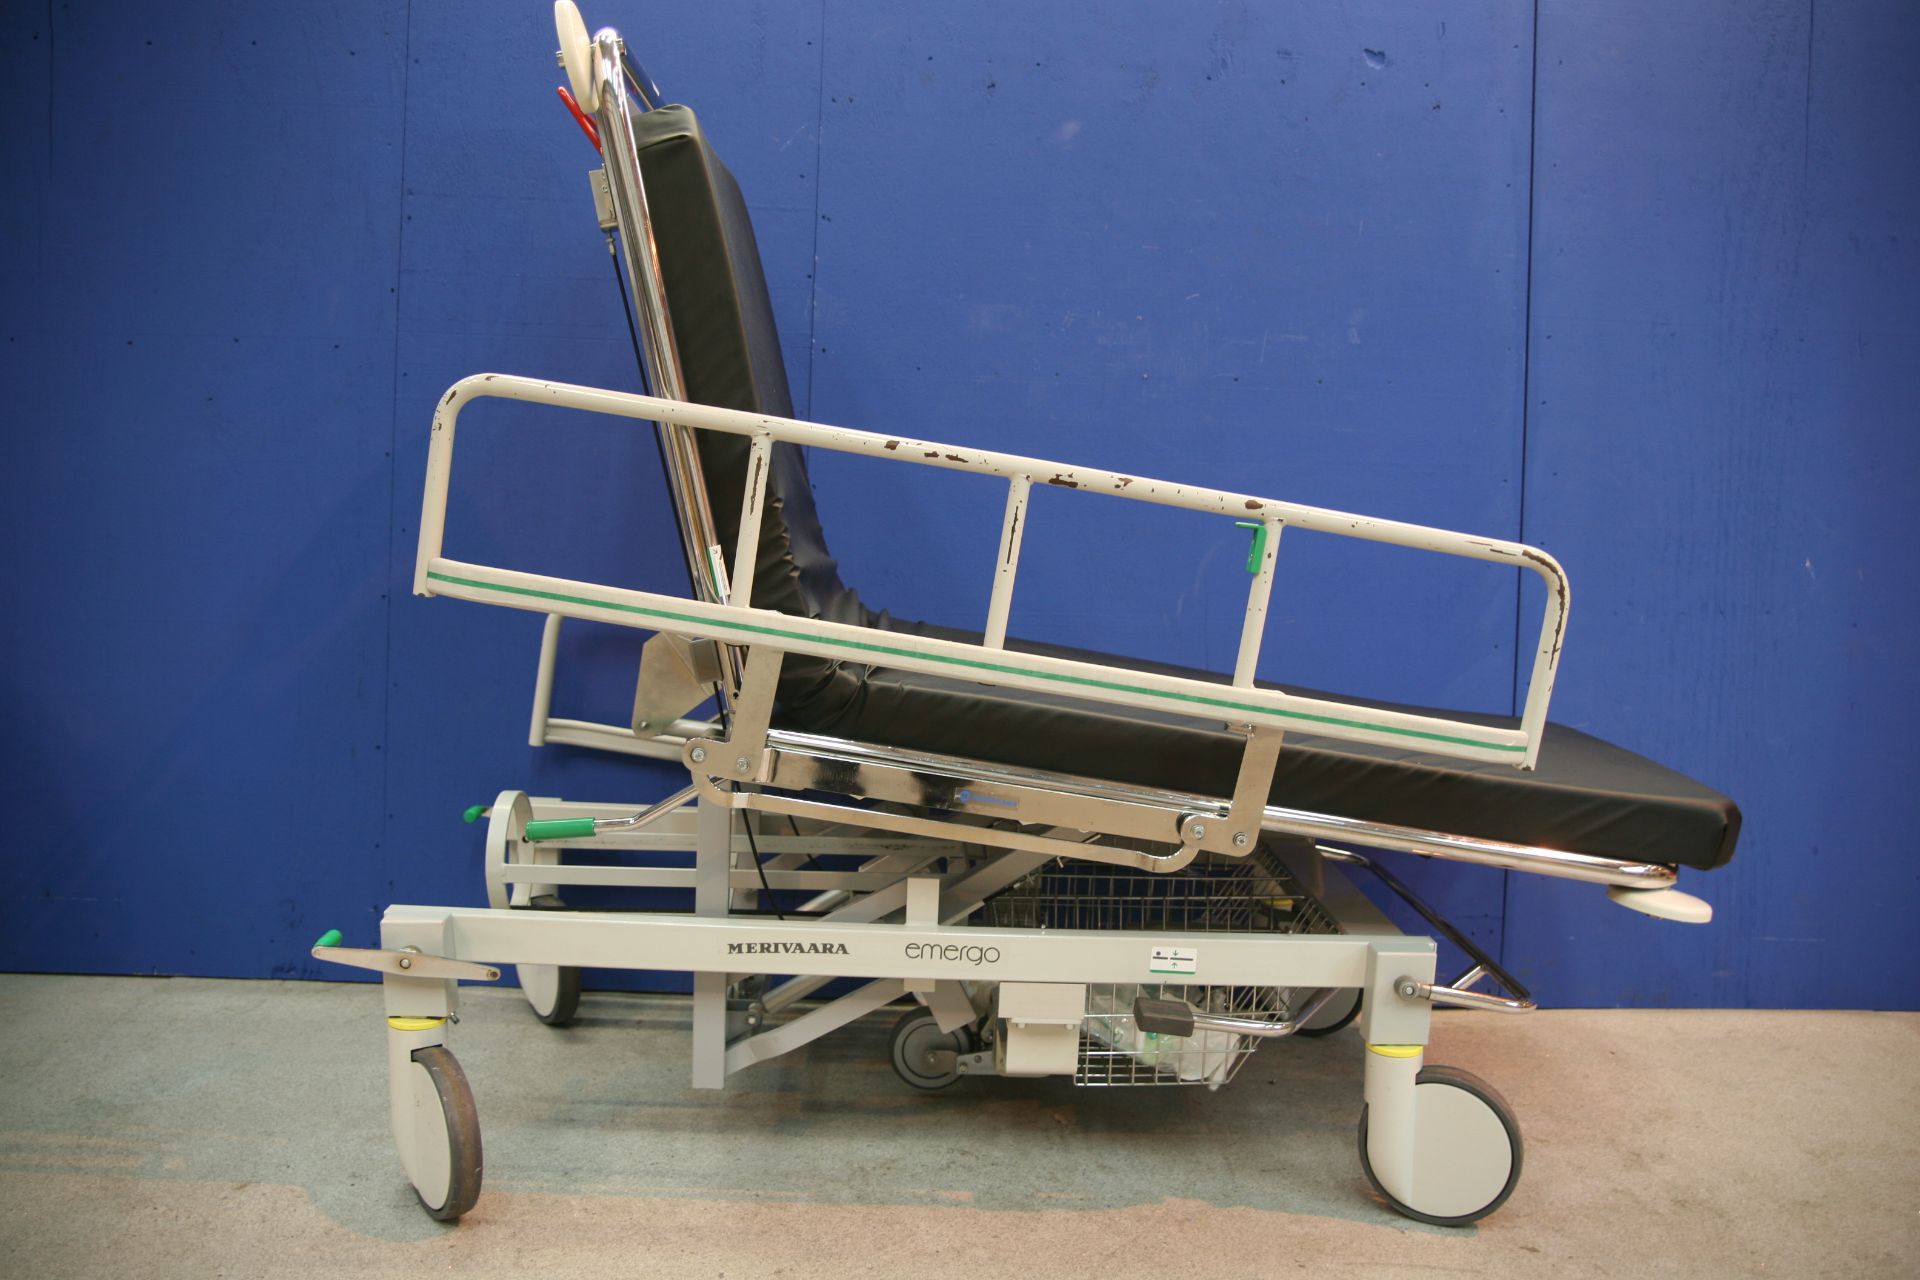 Merivaara Emergo Hydraulic Patient Trolley Hydraulics Working With Matress *Will Not Level Out*